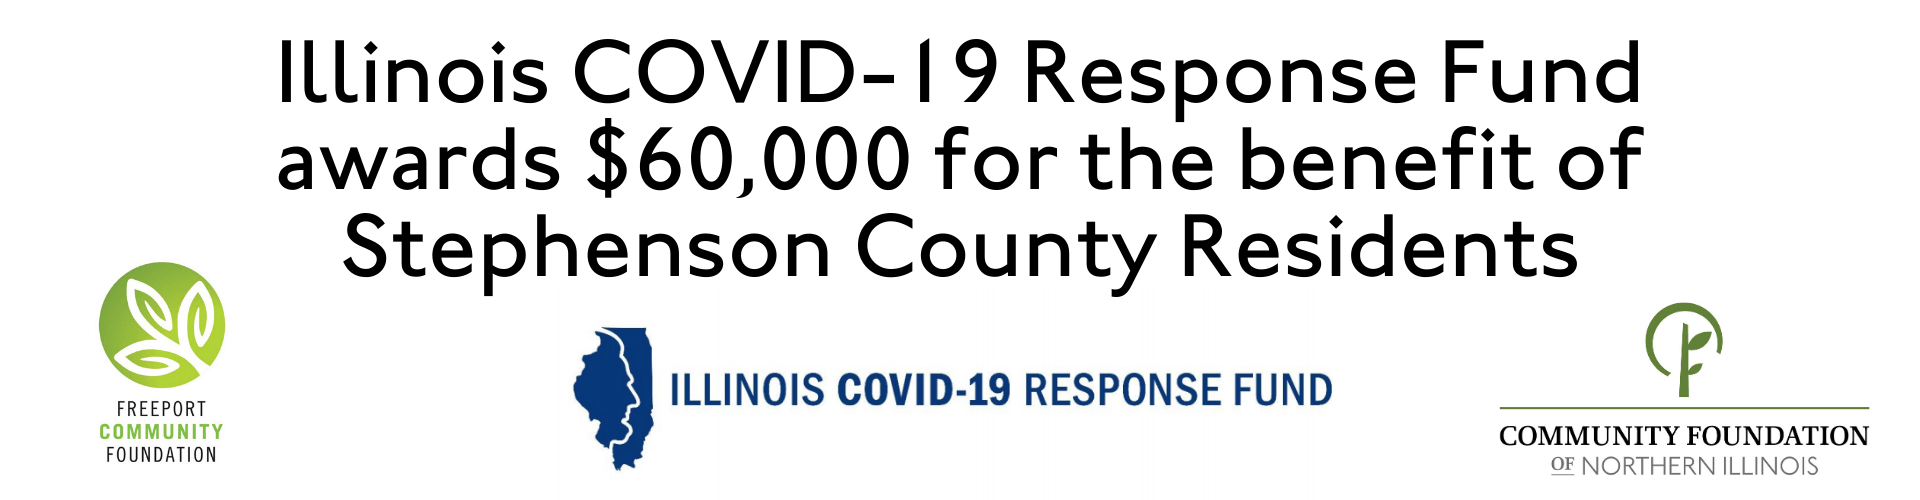 Illinois COVID-19 Response Fund awards $60,000 for the benefit of  Stephenson County Residents